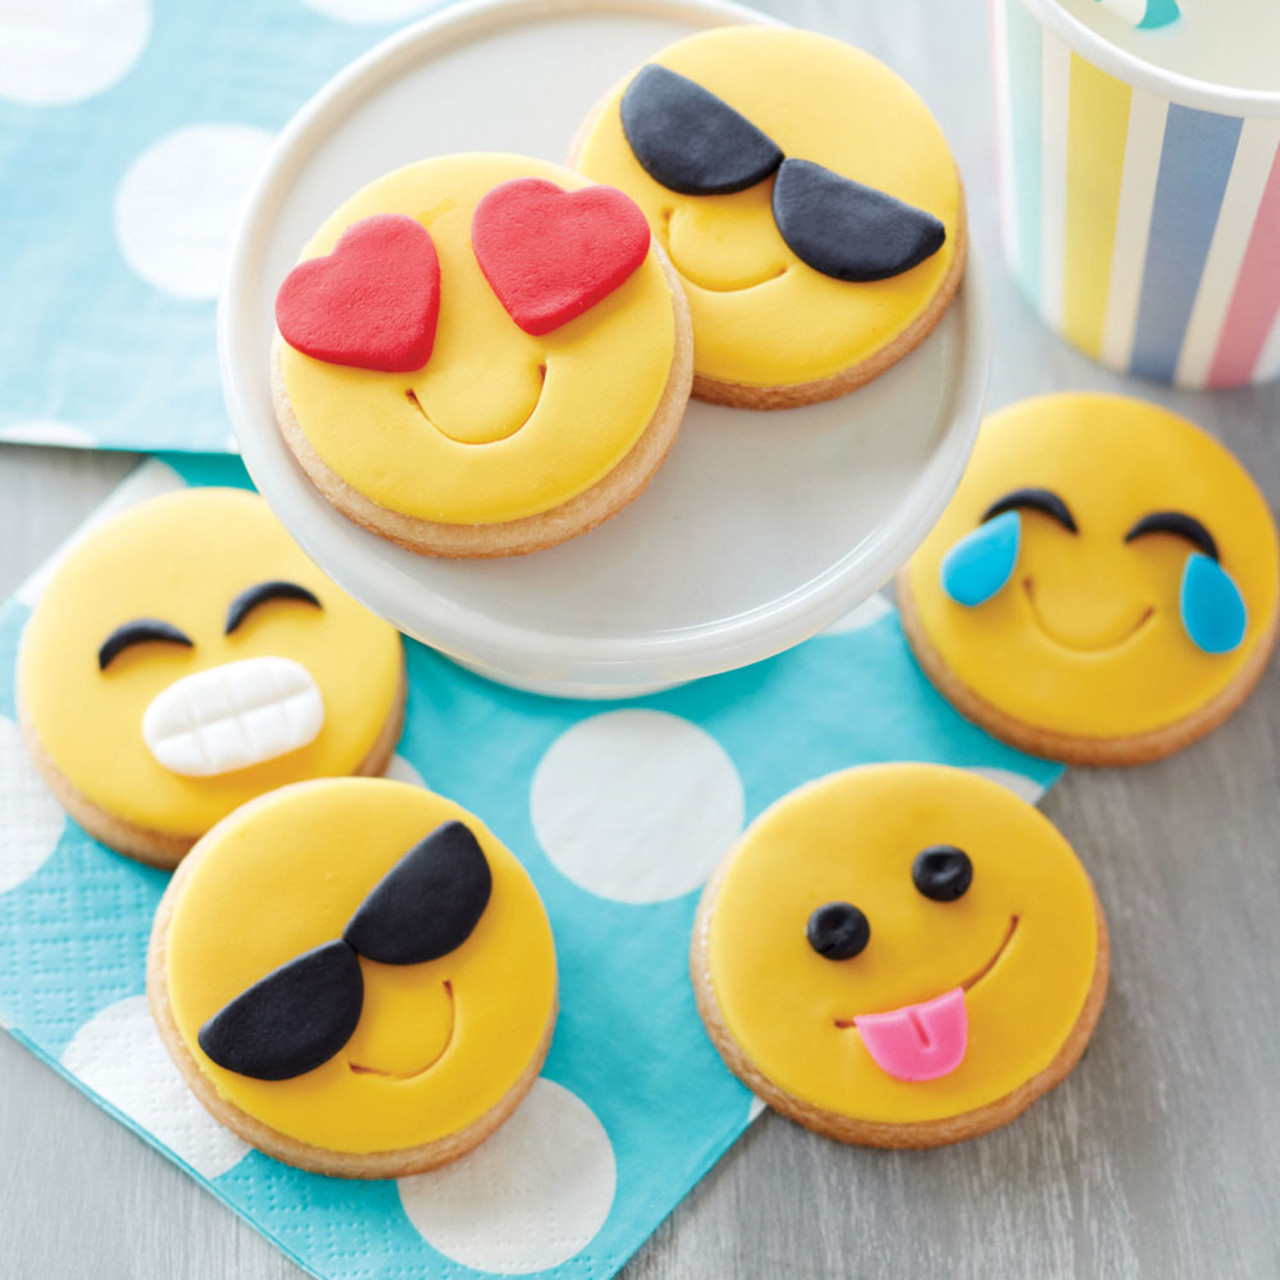 Angry Face Cute and Funny Editable Colors Emoji Sugar Cookie